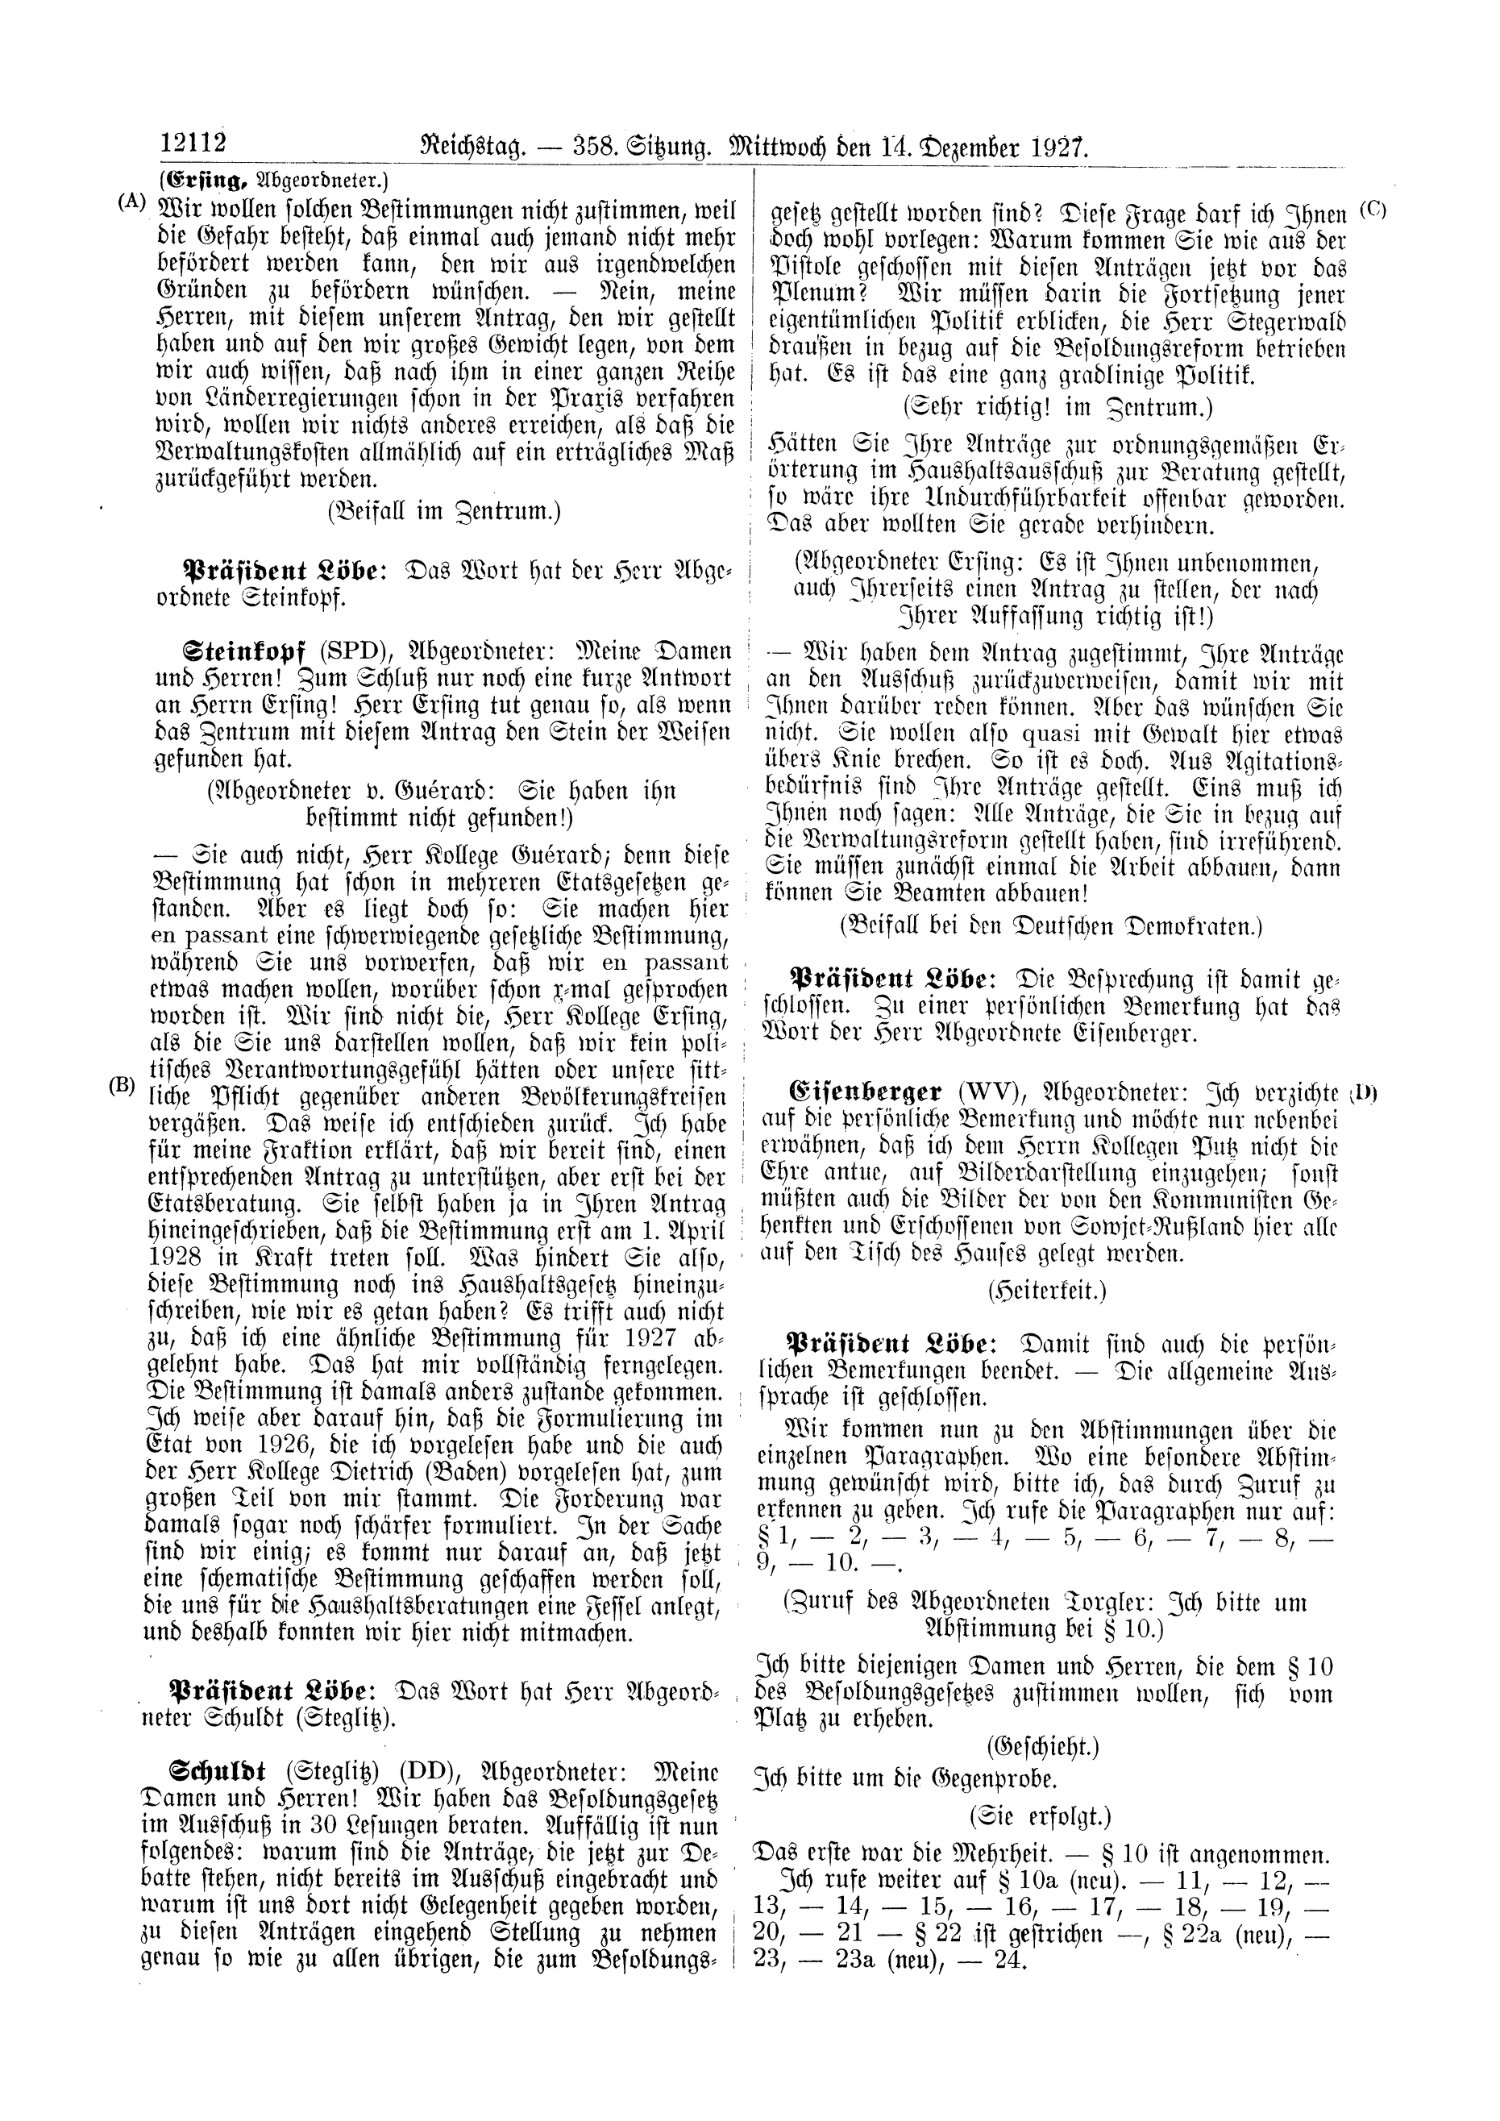 Scan of page 12112